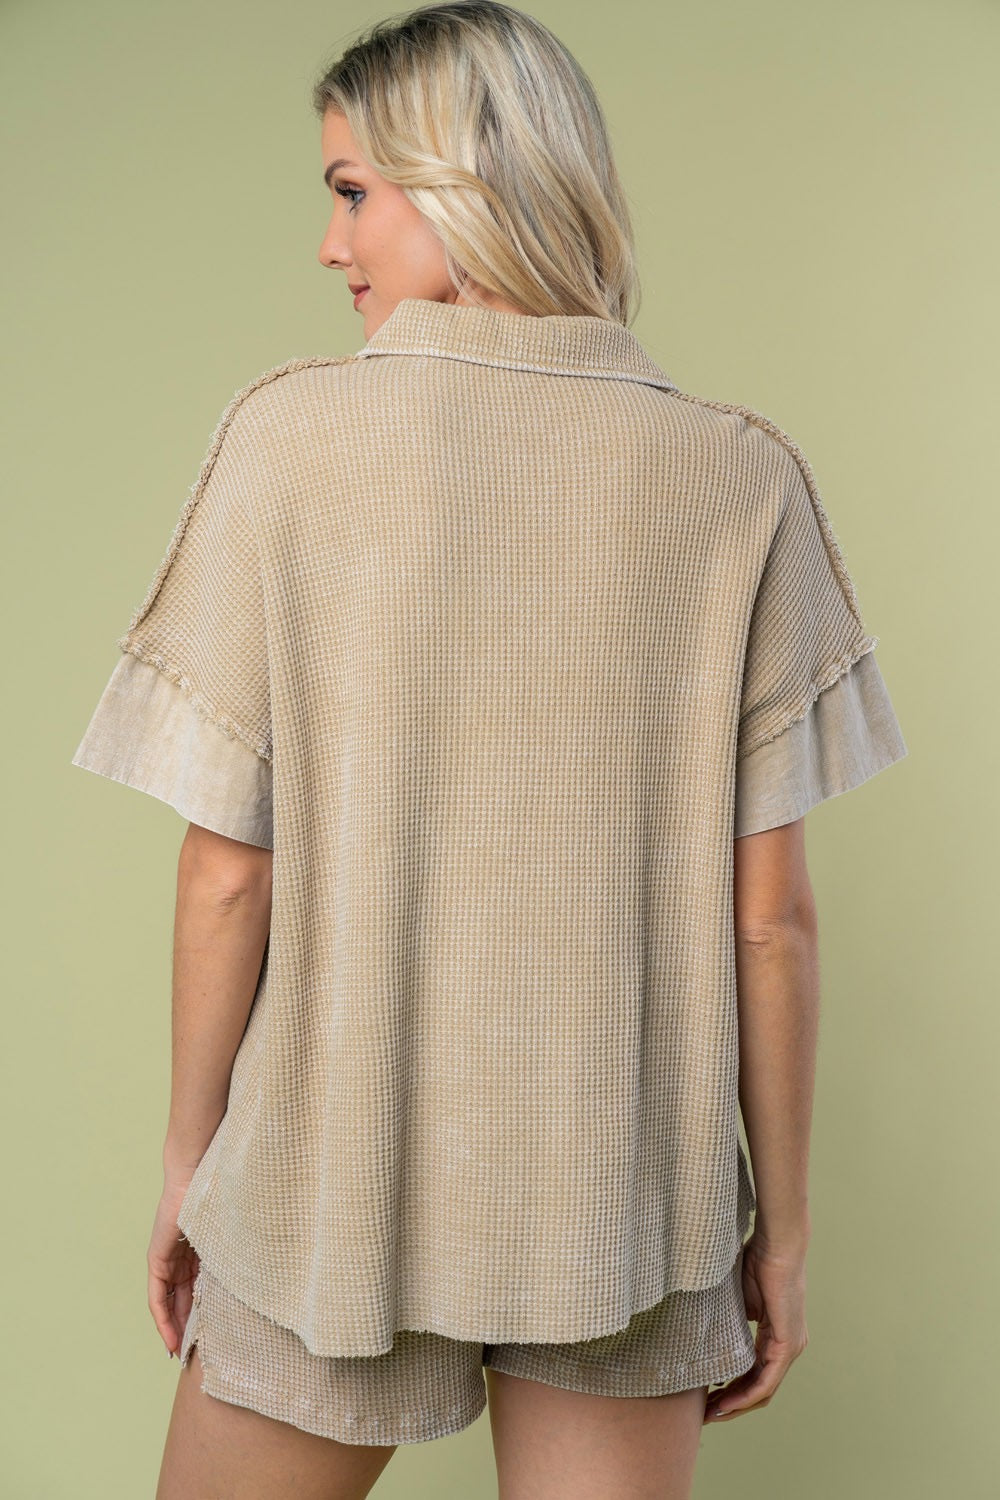 Collared Thermal Spring Top